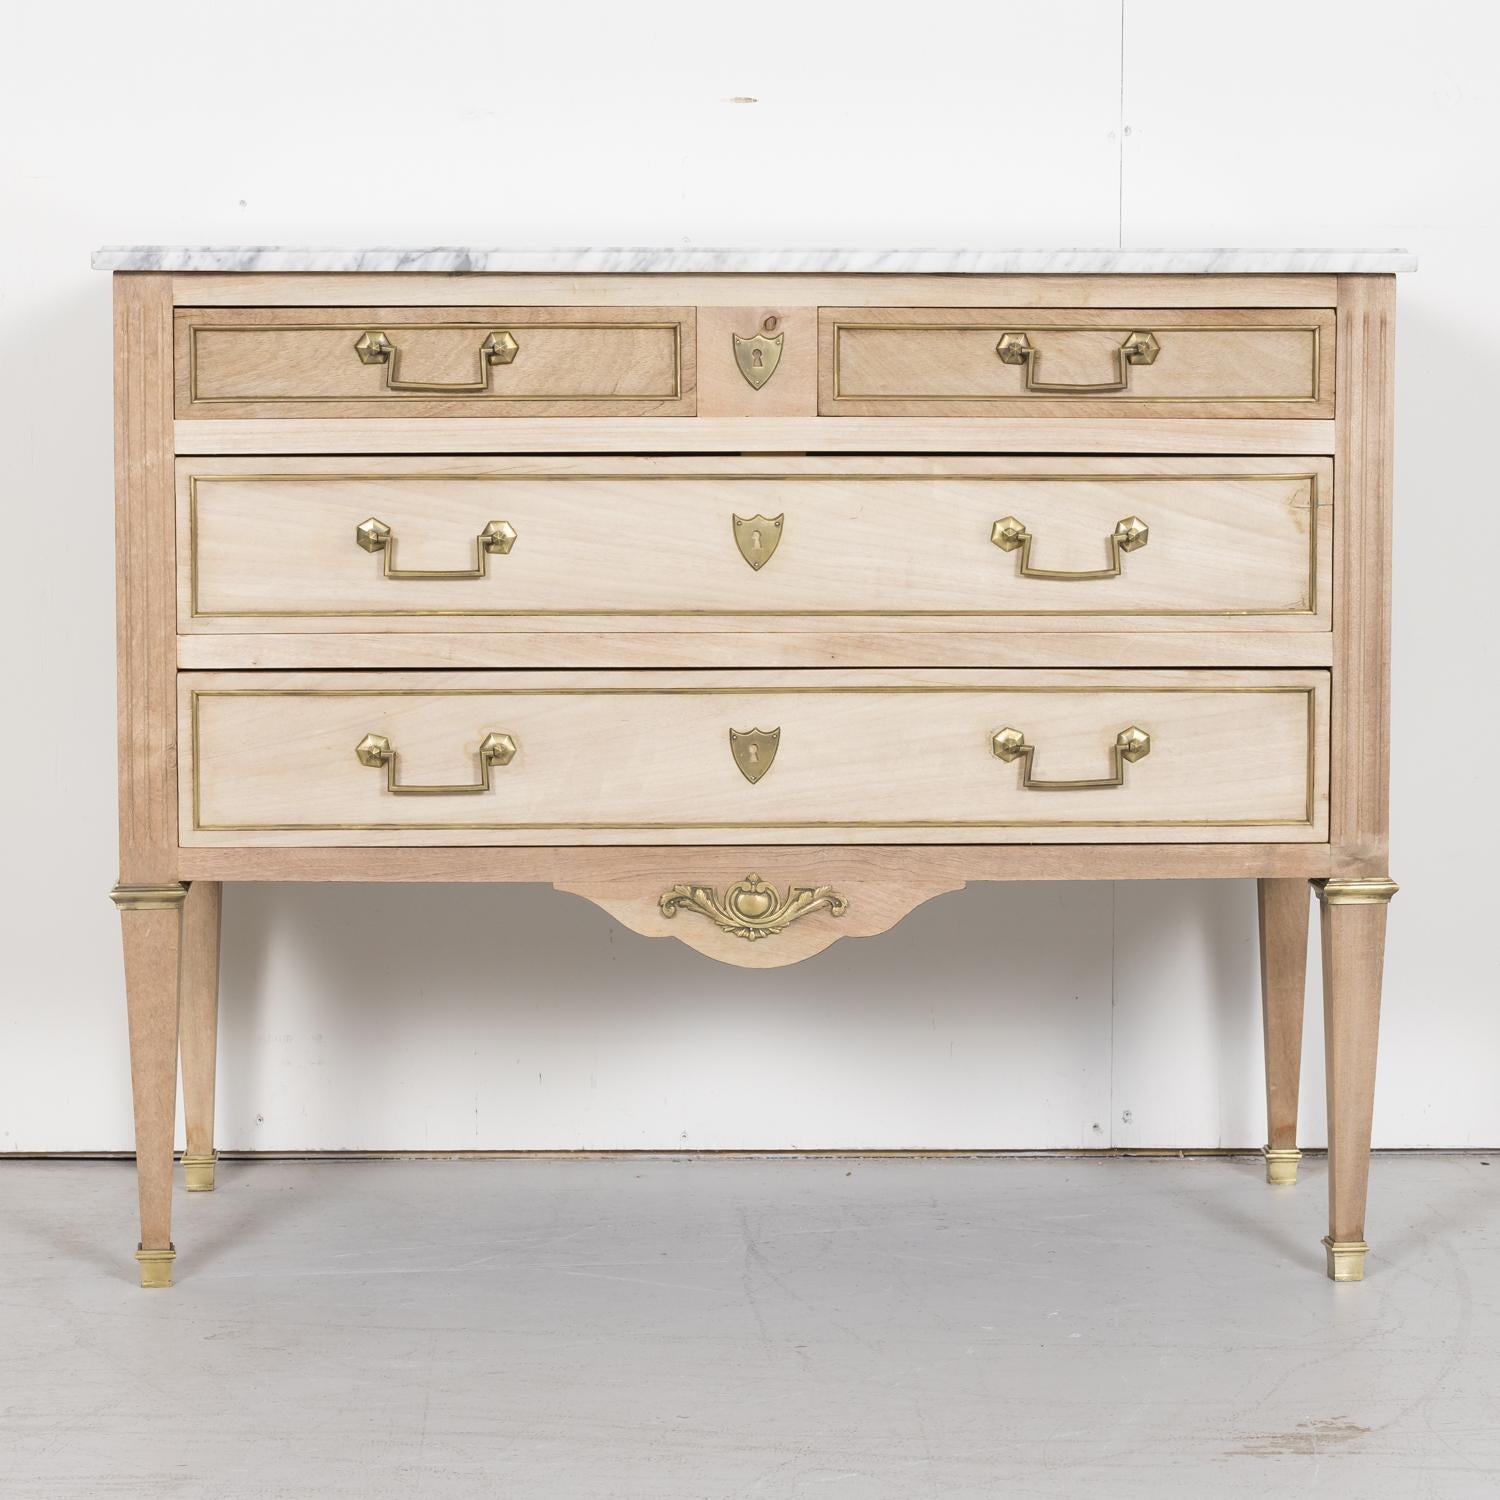 Early 20th Century French Louis XVI Style Bleached Commode with Carrara Marble 1